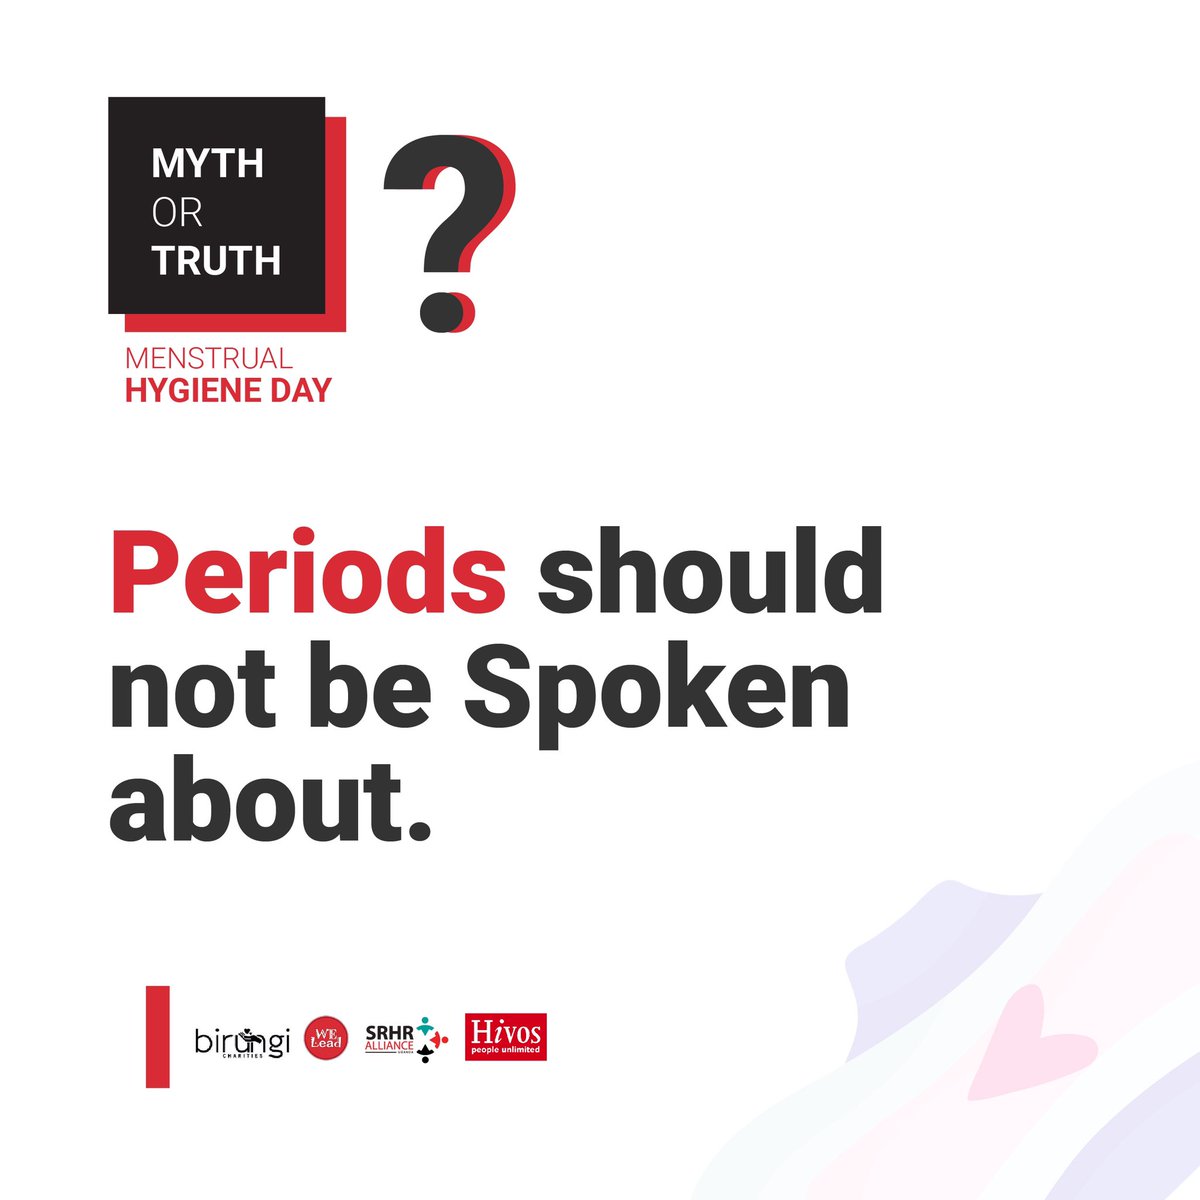 Start the period conversations early and slowly build on your child's understanding. Girls and boys need reliable information about periods.

#HealthyPeriods4Her 
#WeAreCommitted 
#WeLeadOurSRHR